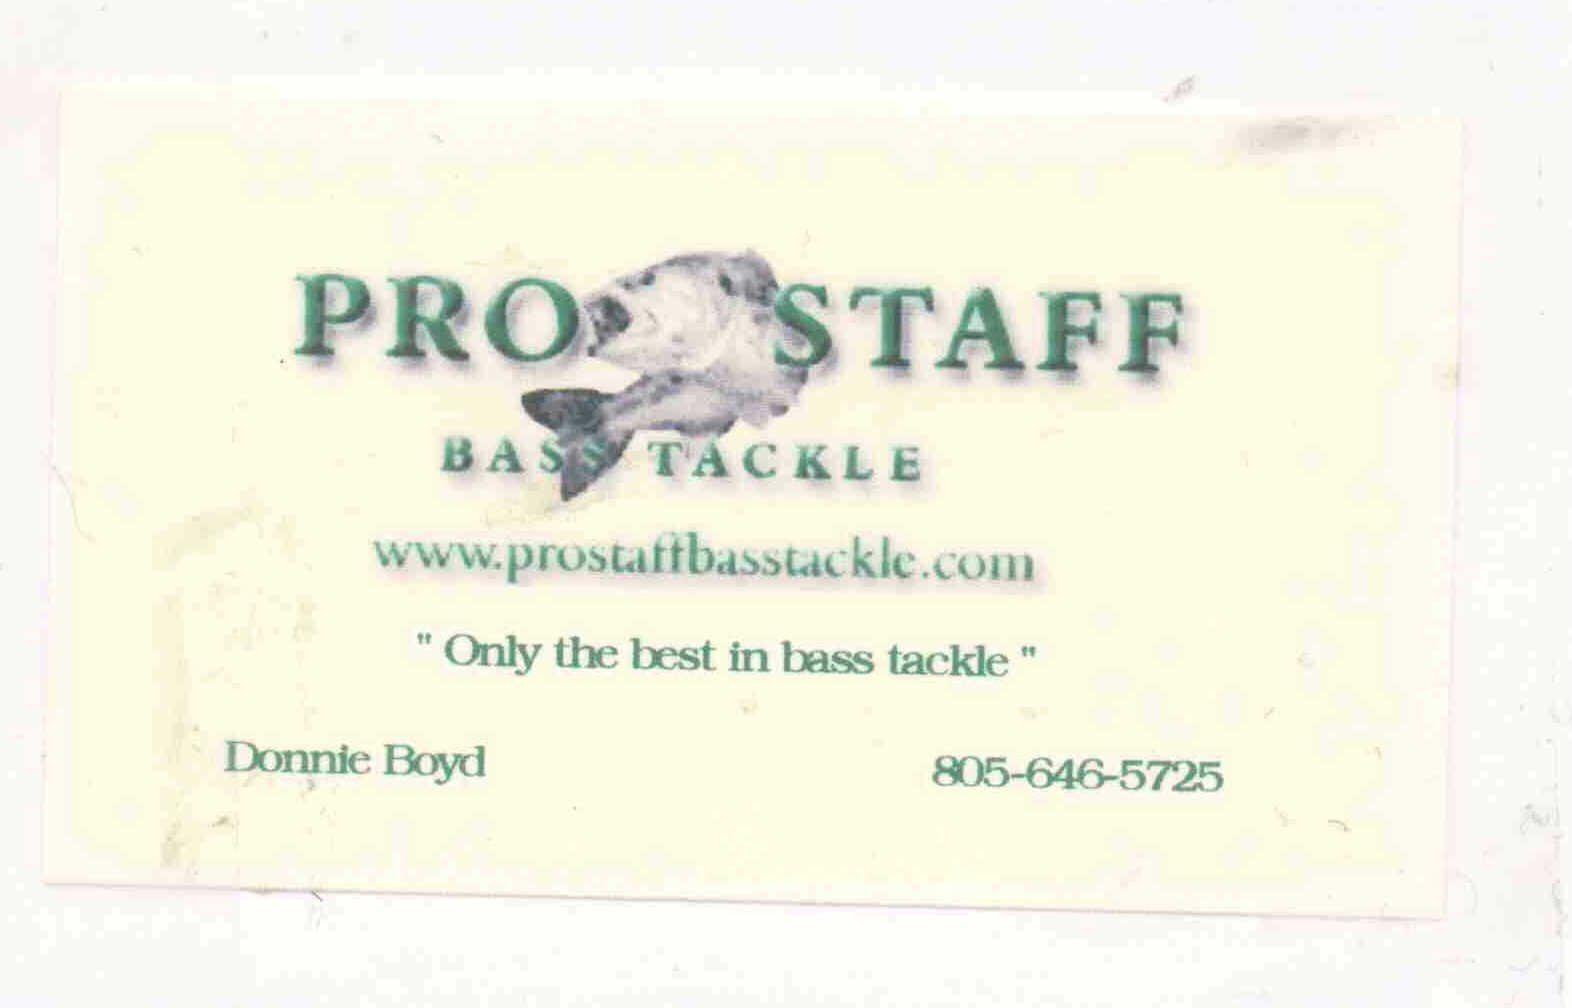 Trademark Logo PRO STAFF BASS TACKLE WWW.PROSTAFFBASSTACKLE.COM &quot;ONLY THE BEST IN BASS TACKLE&quot;